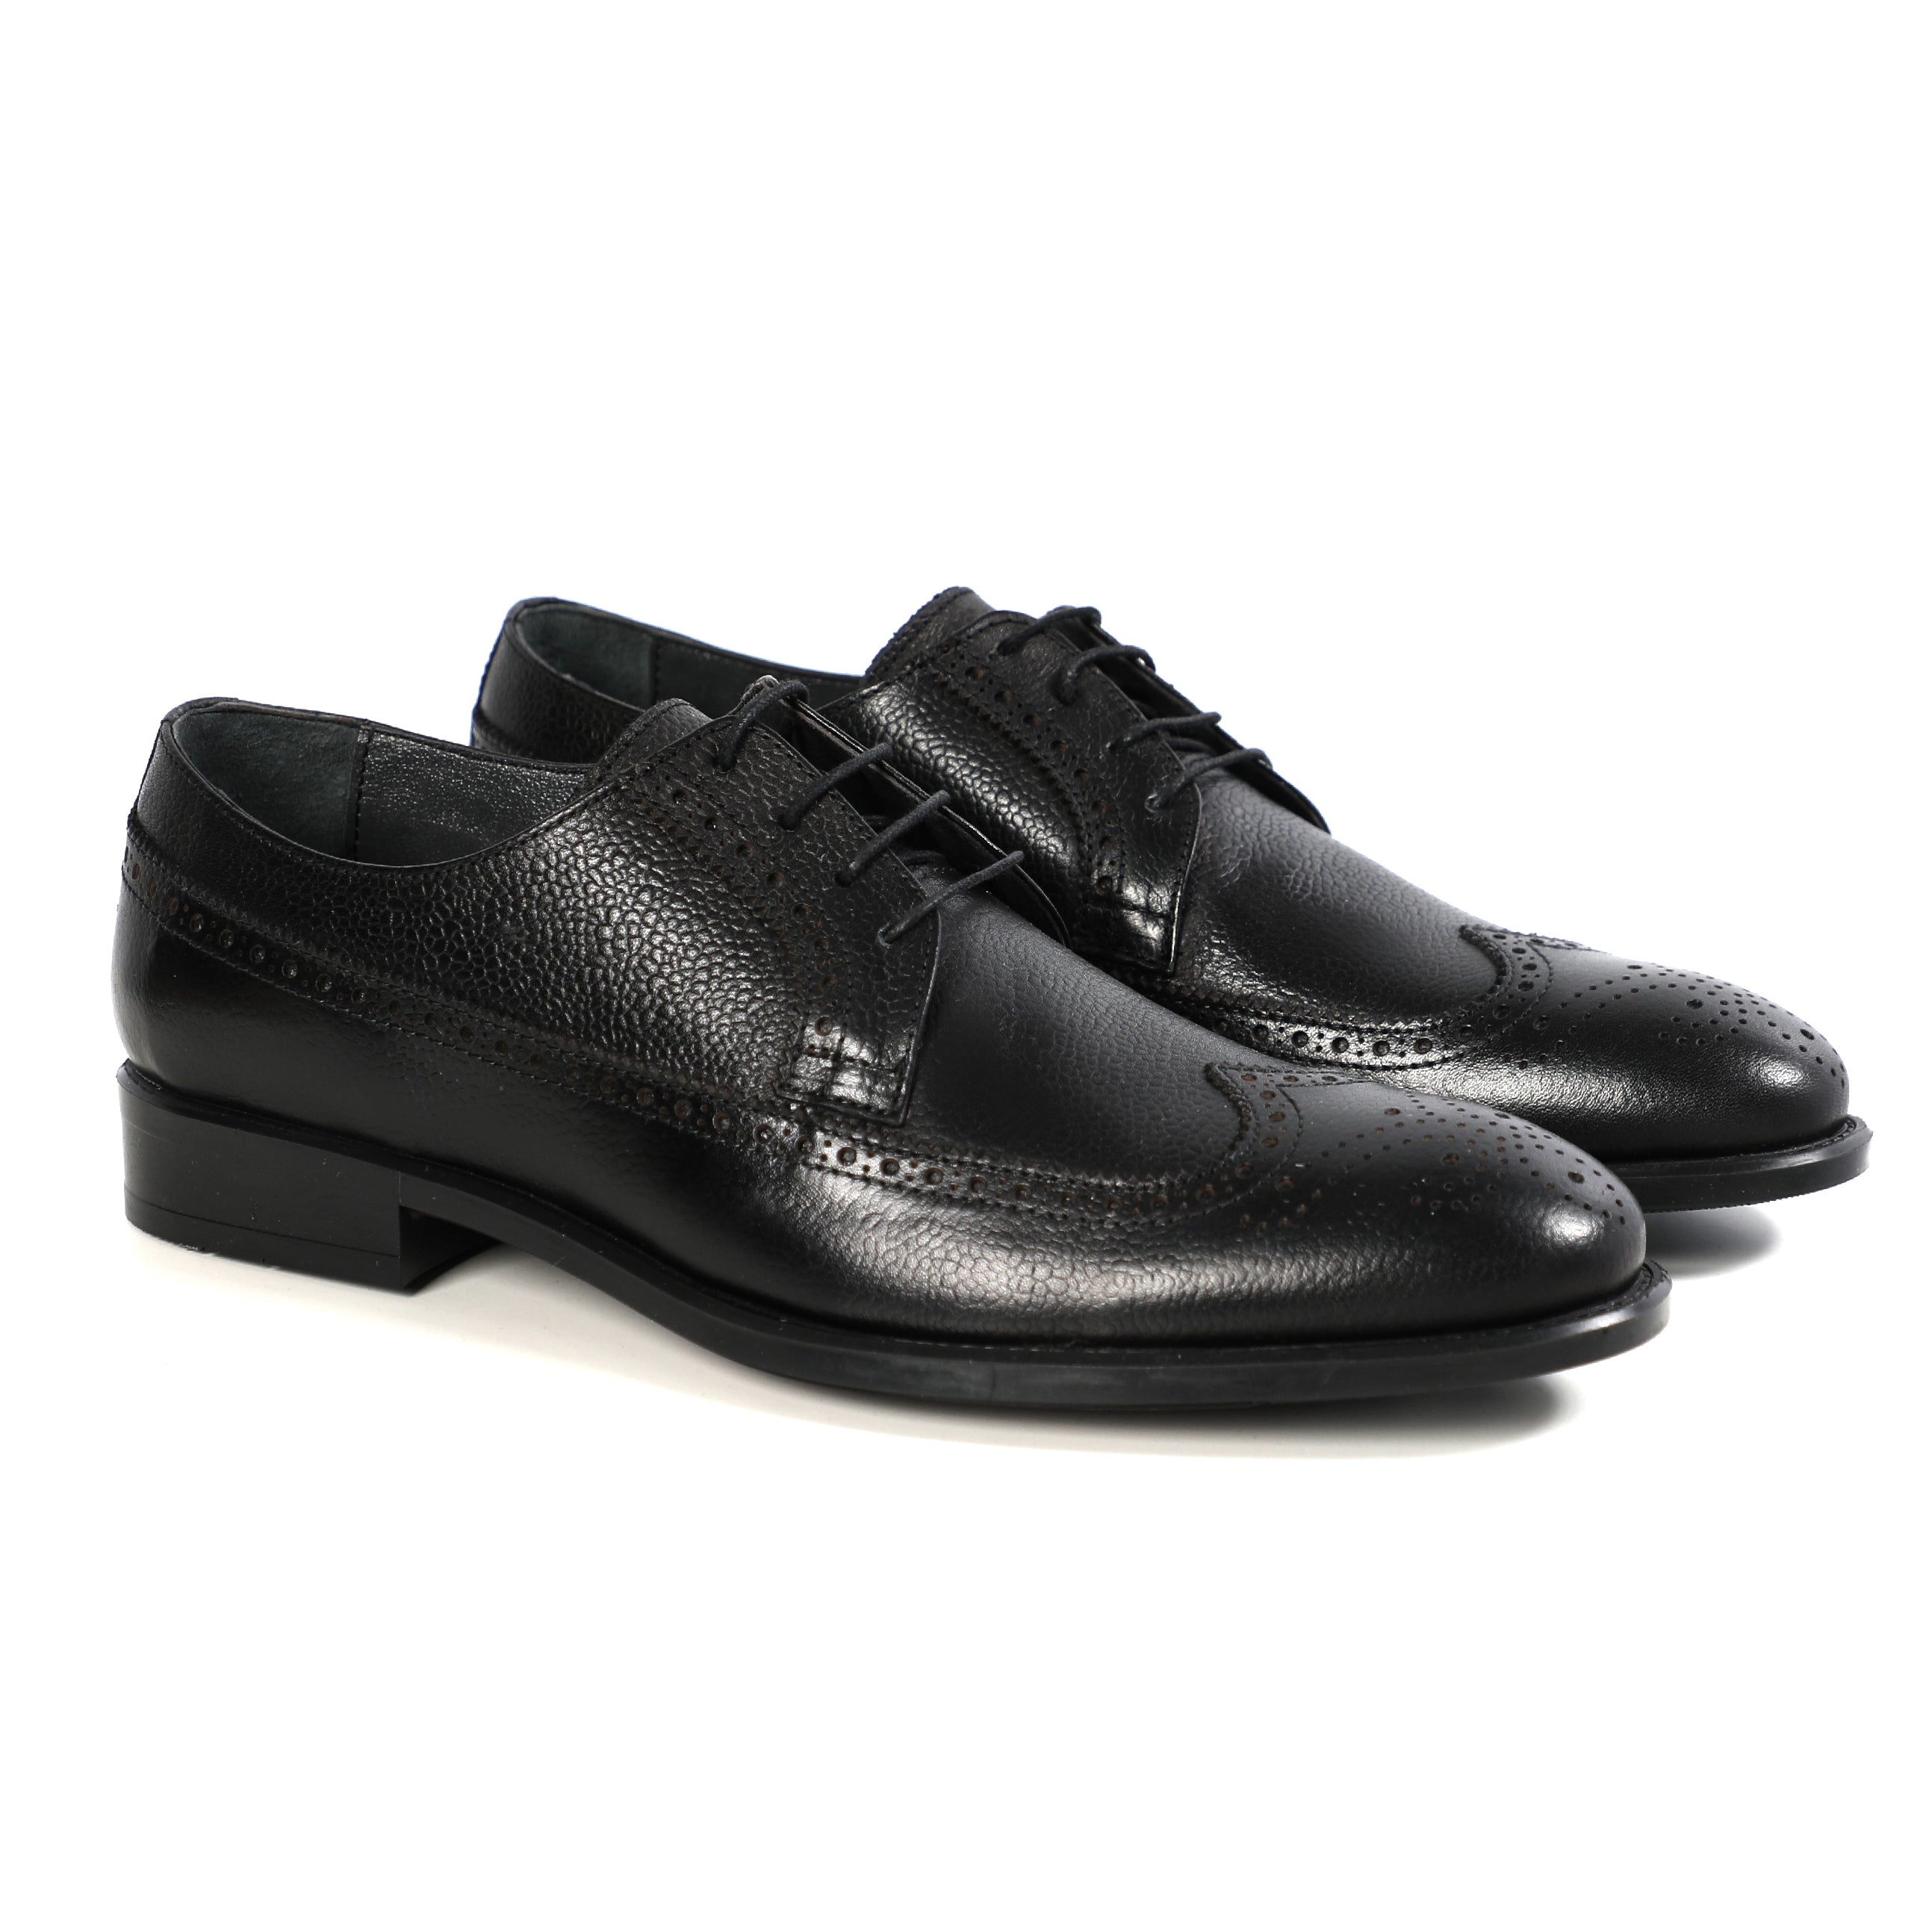 Men Black Classic Shoes With Crafted Cut